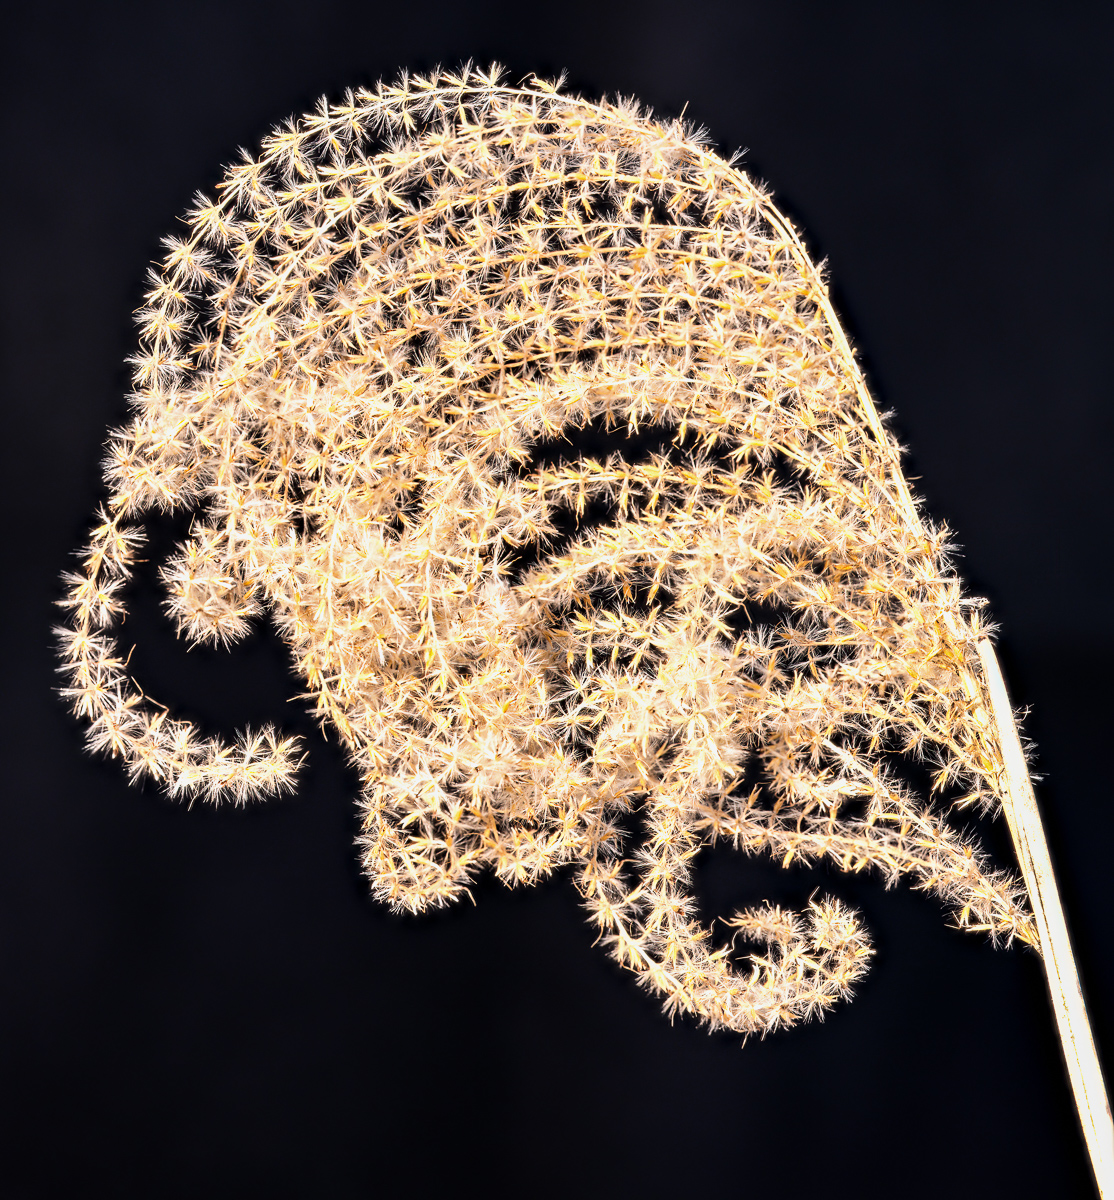 Seed head of pampas grass